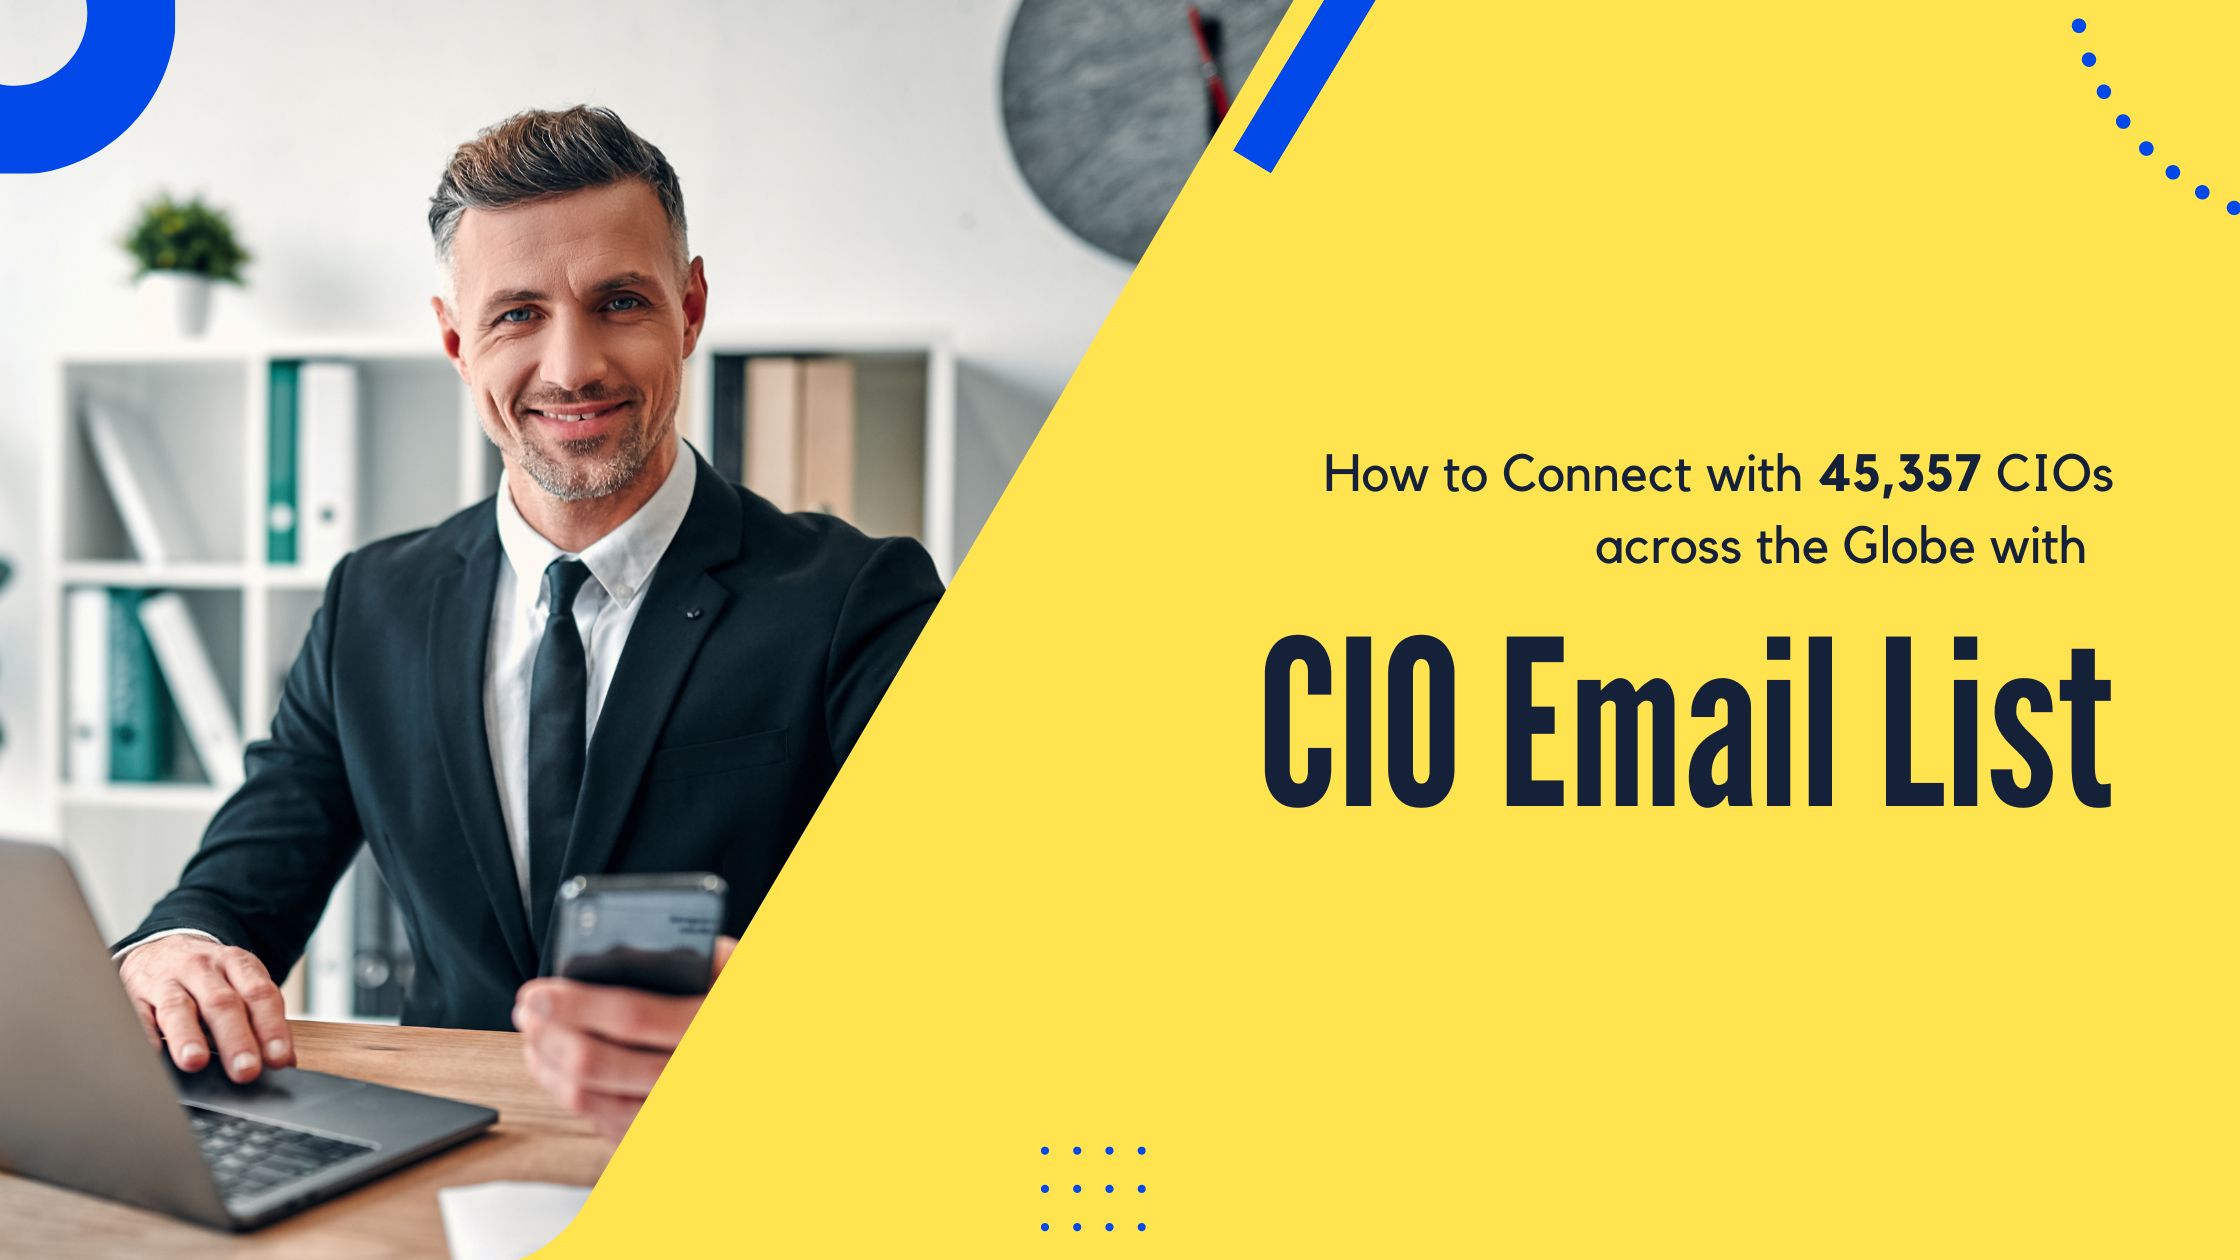 How to Connect with 45,357 CIOs across the Globe with CIO Email List